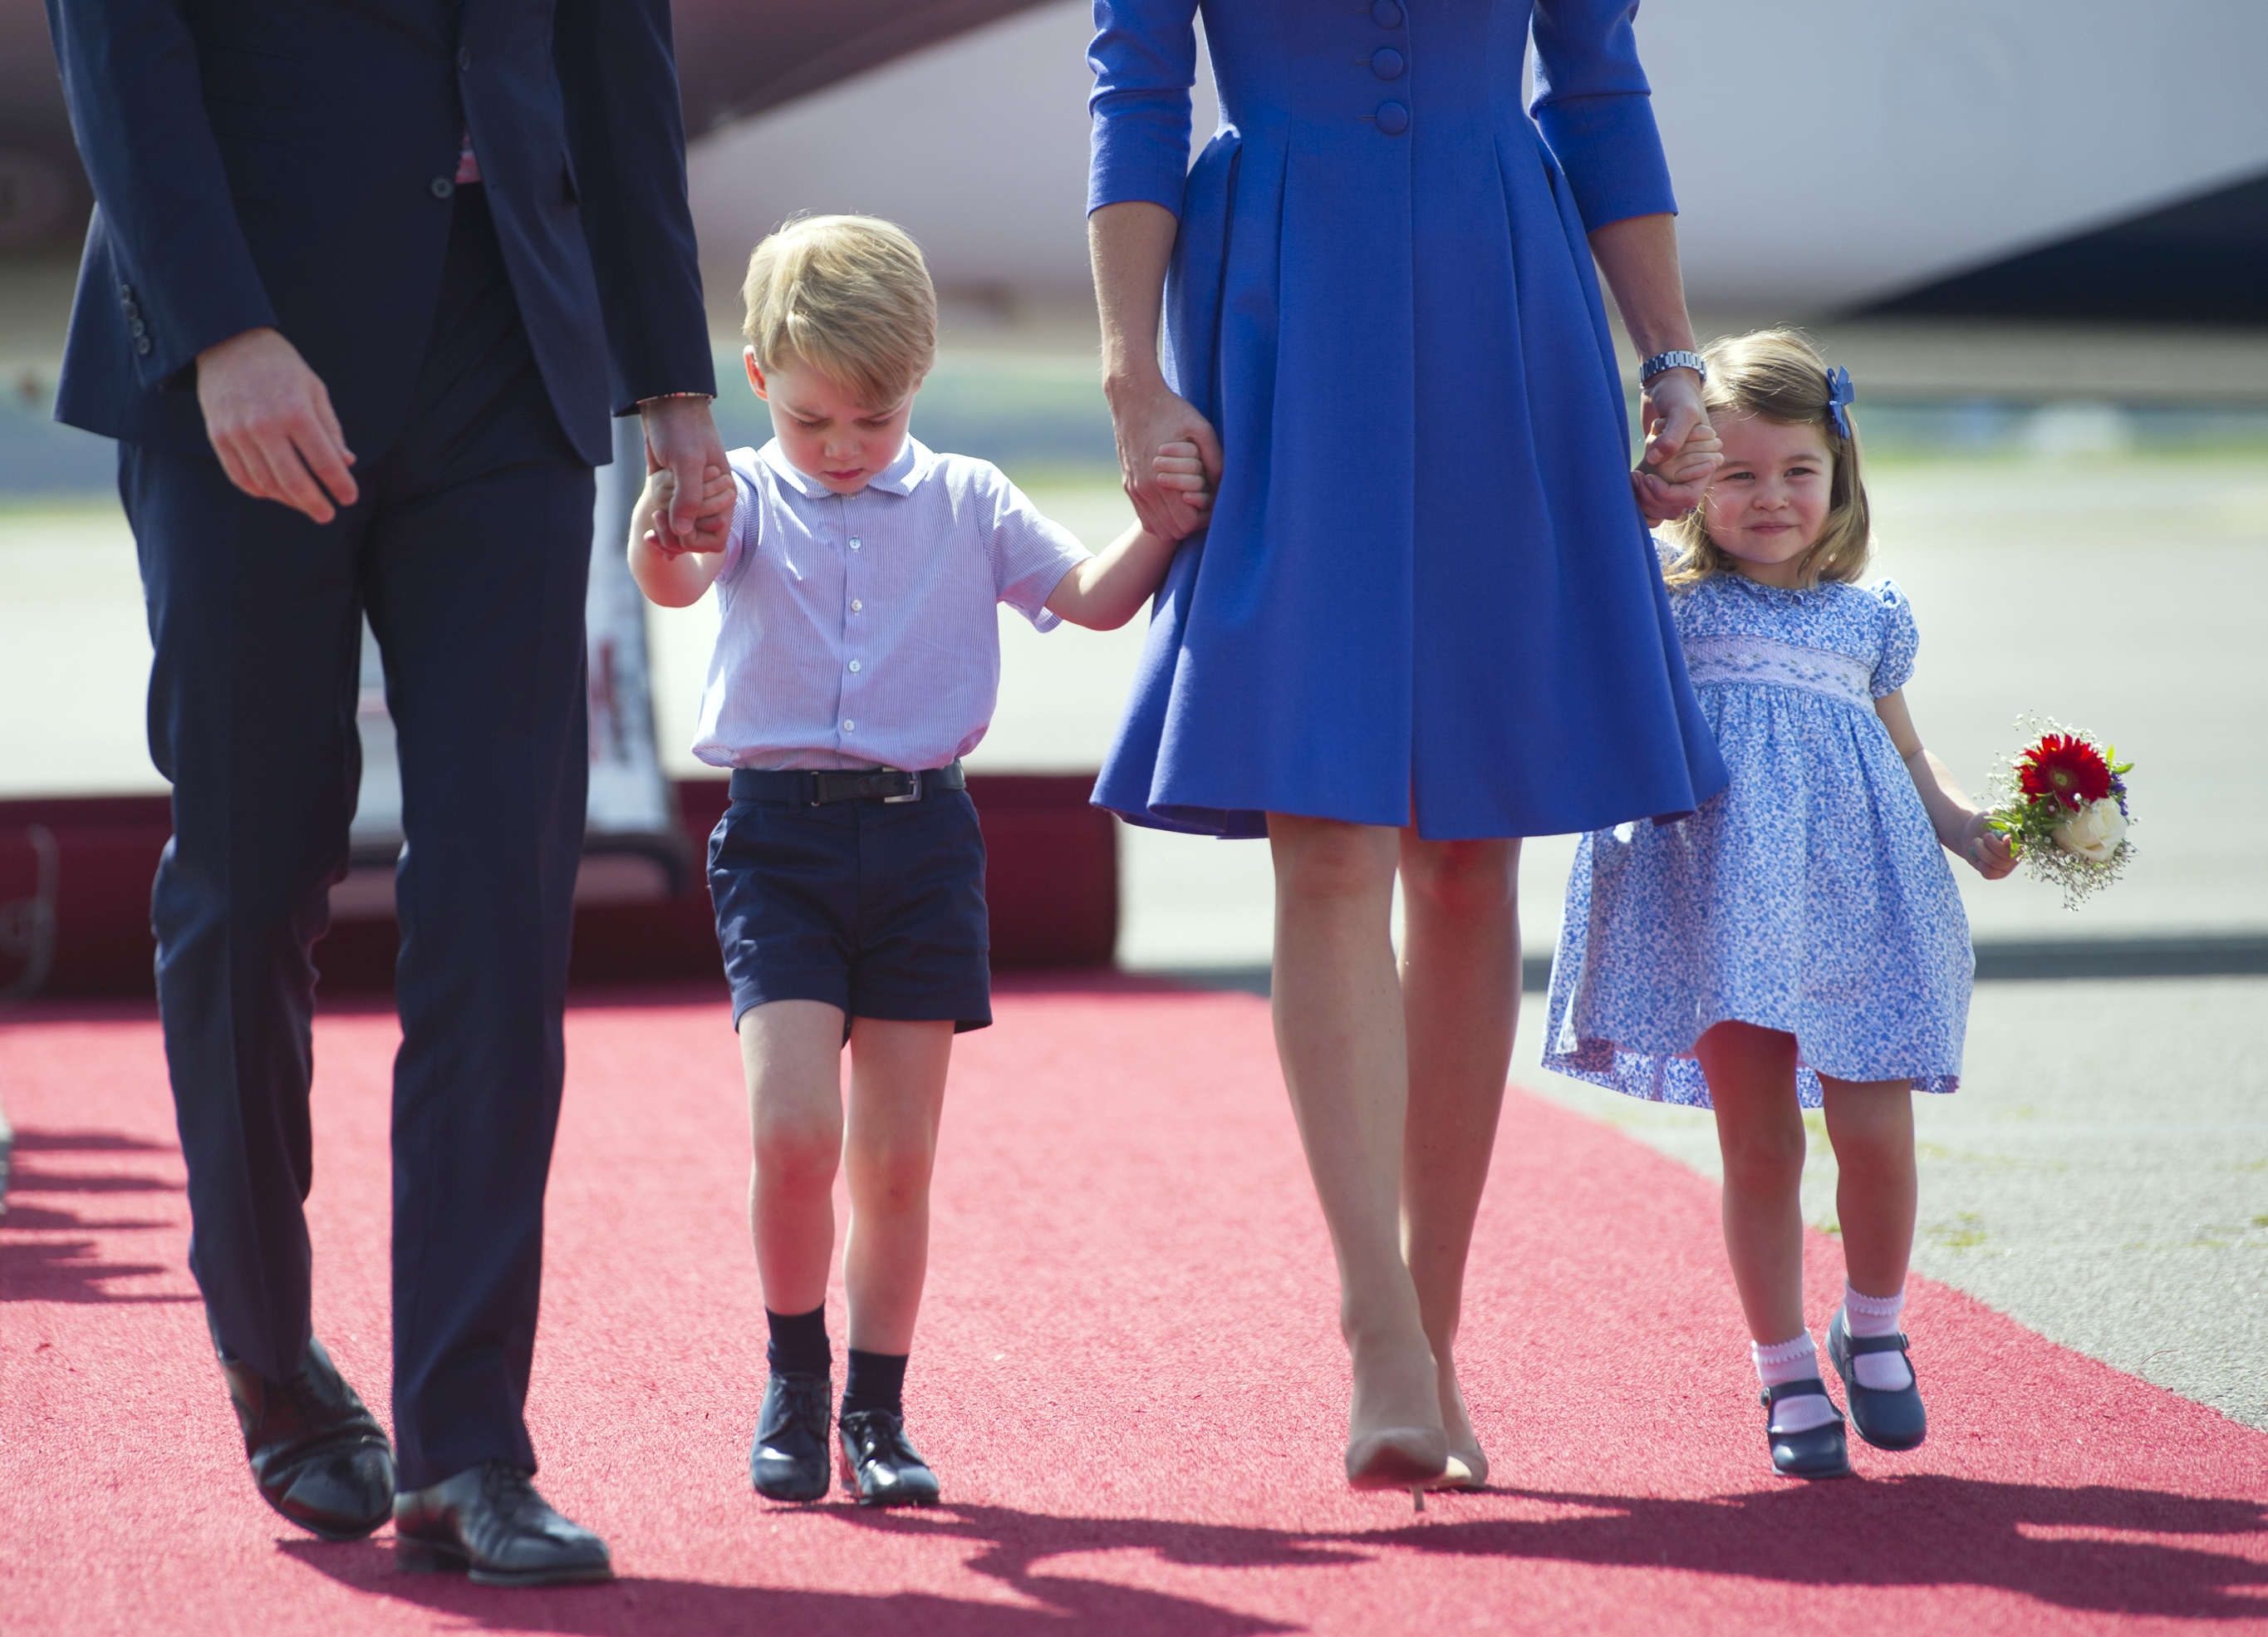 Britain's Prince William, left, Duke of Cambridge, Kate, the Duchess of Cambridge and their children Prince George, second left, and Princess Charlotte arrive at the airport in Berlin, Wednesday, July 19, 2017. The British royal couple is on a three-day-visit in Germany. (Steffi Loos/Pool Photo via AP)